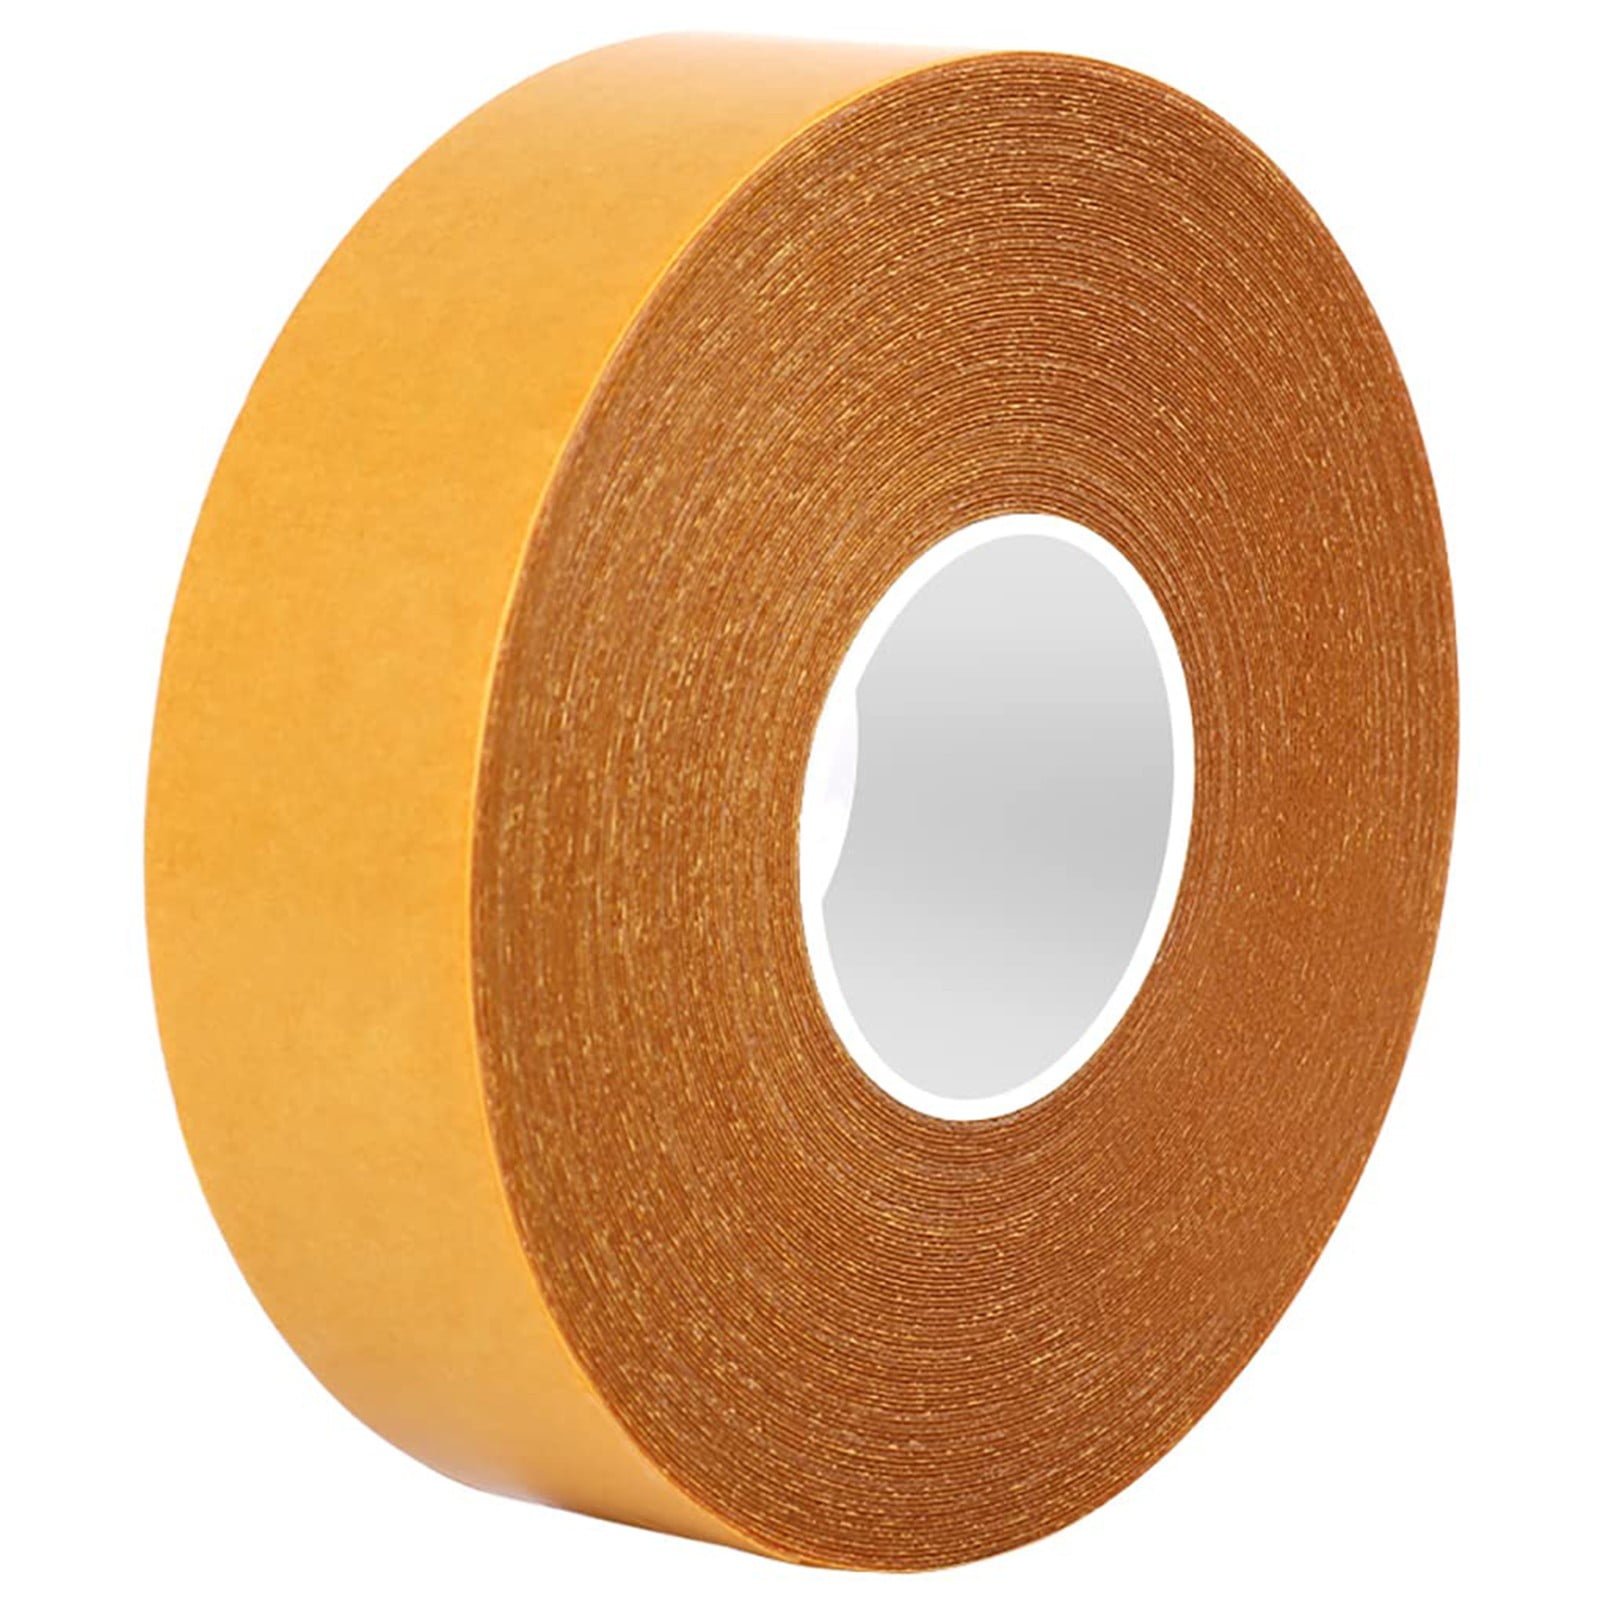 Dritz Res-Q-Tape Hem Strips, Double-Sided Adhesive Tape, 1/2 inch